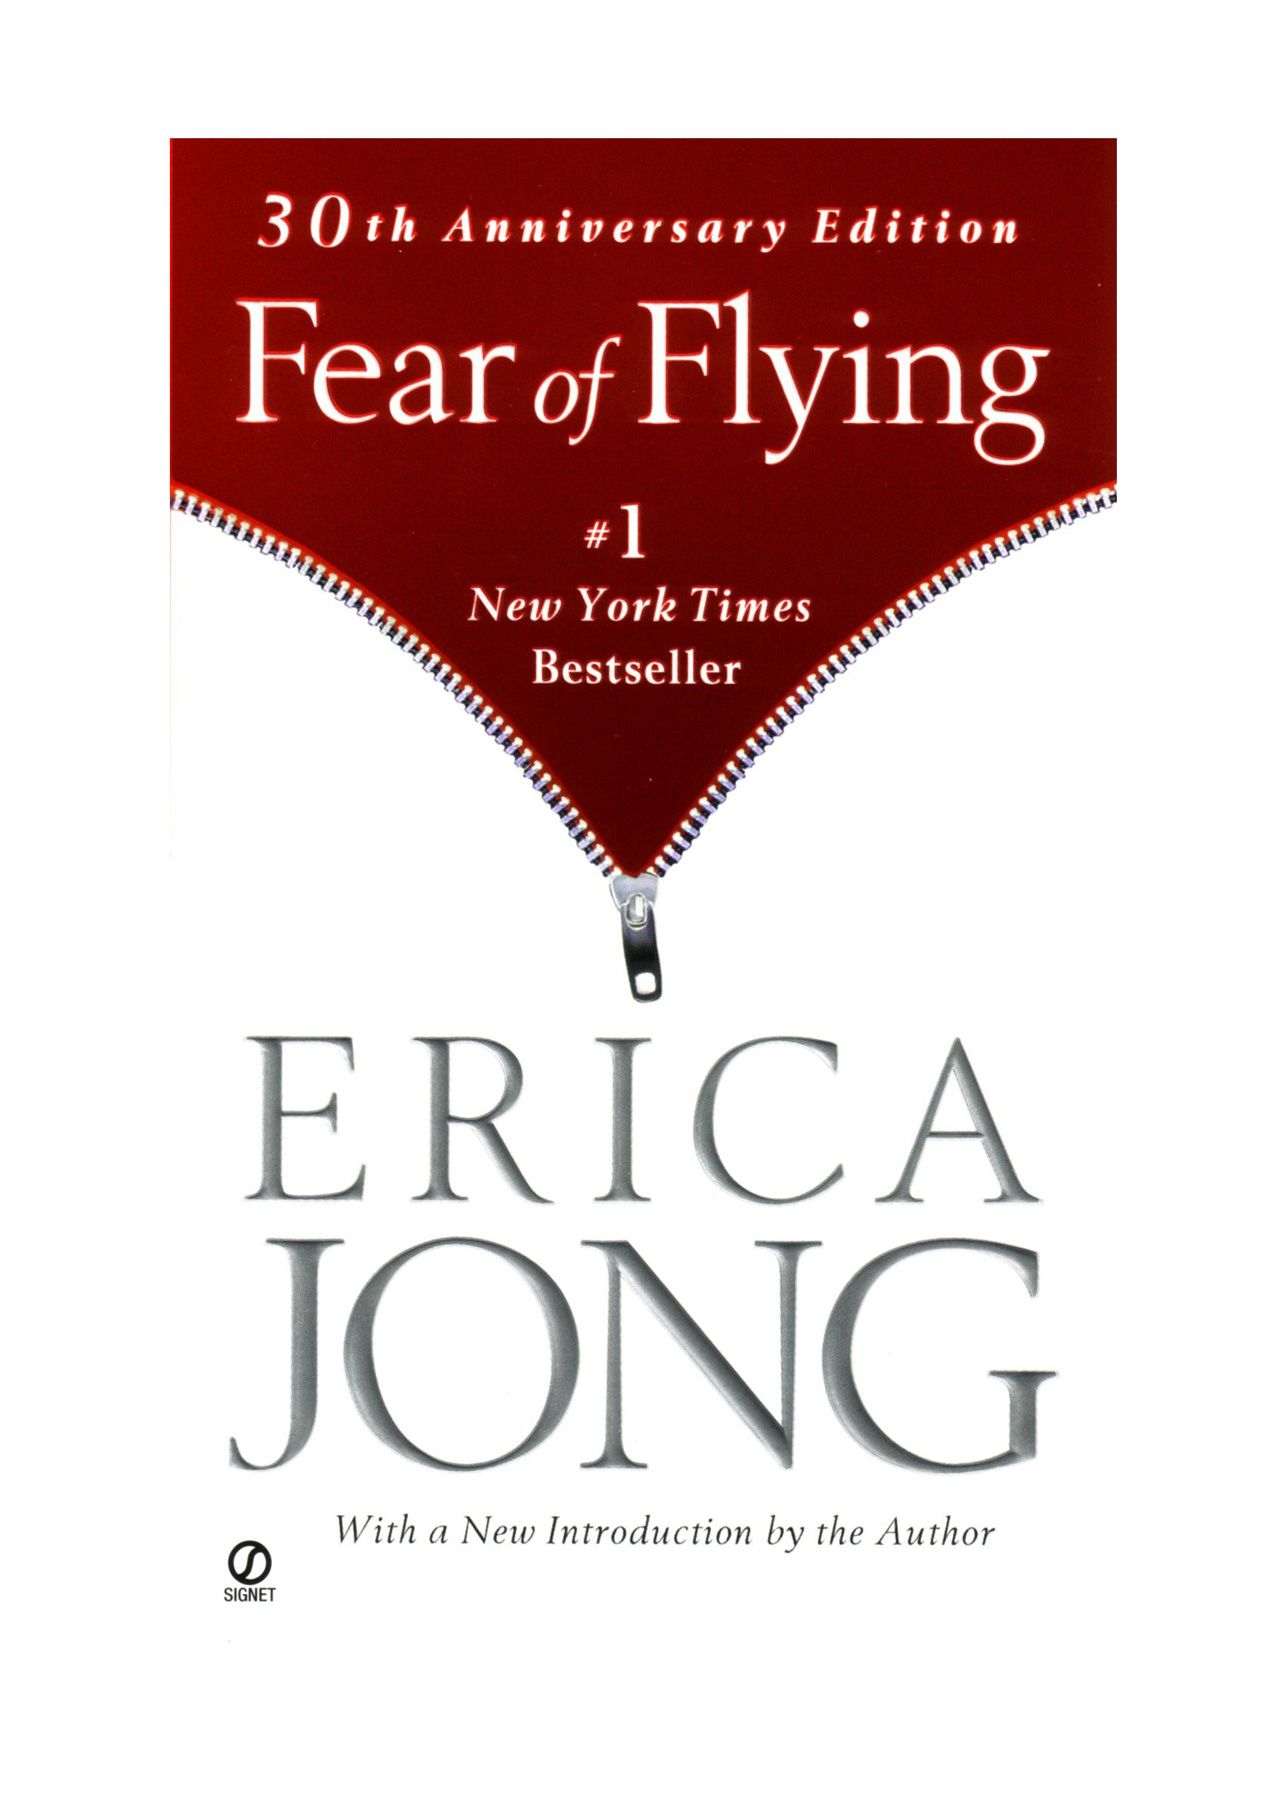 Good Books to Read in Your 20s: ‘Fear of Flying’ by Erica Jong